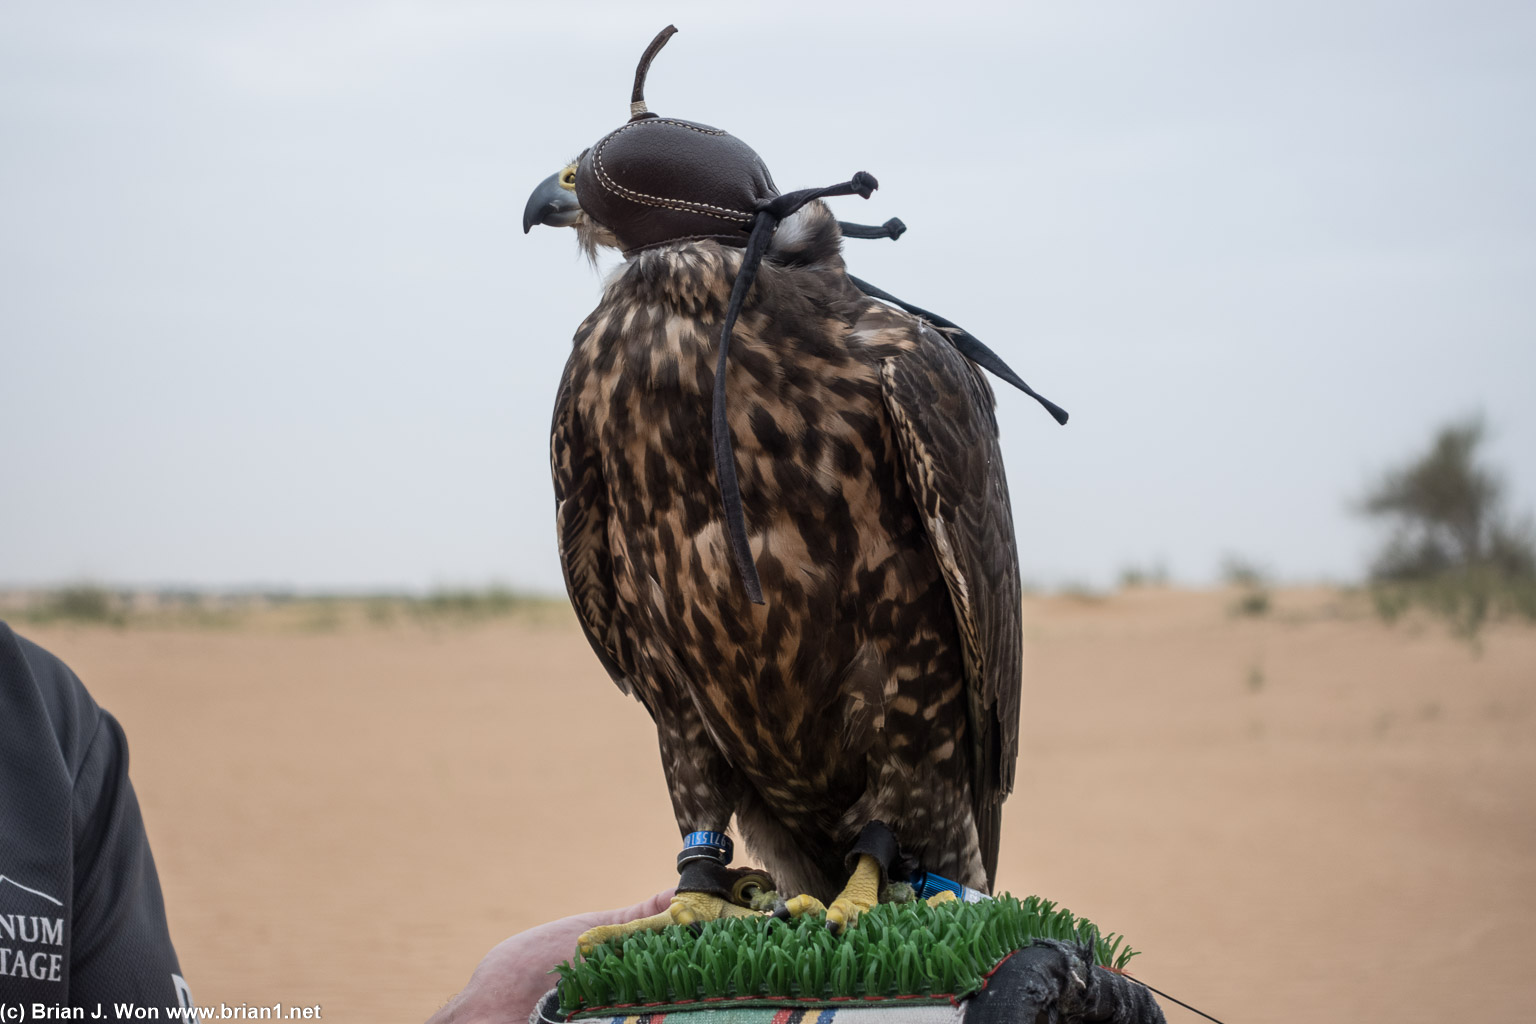 Falcons are 80% sight driven, so to prevent over-stimulation they place hood over their heads.